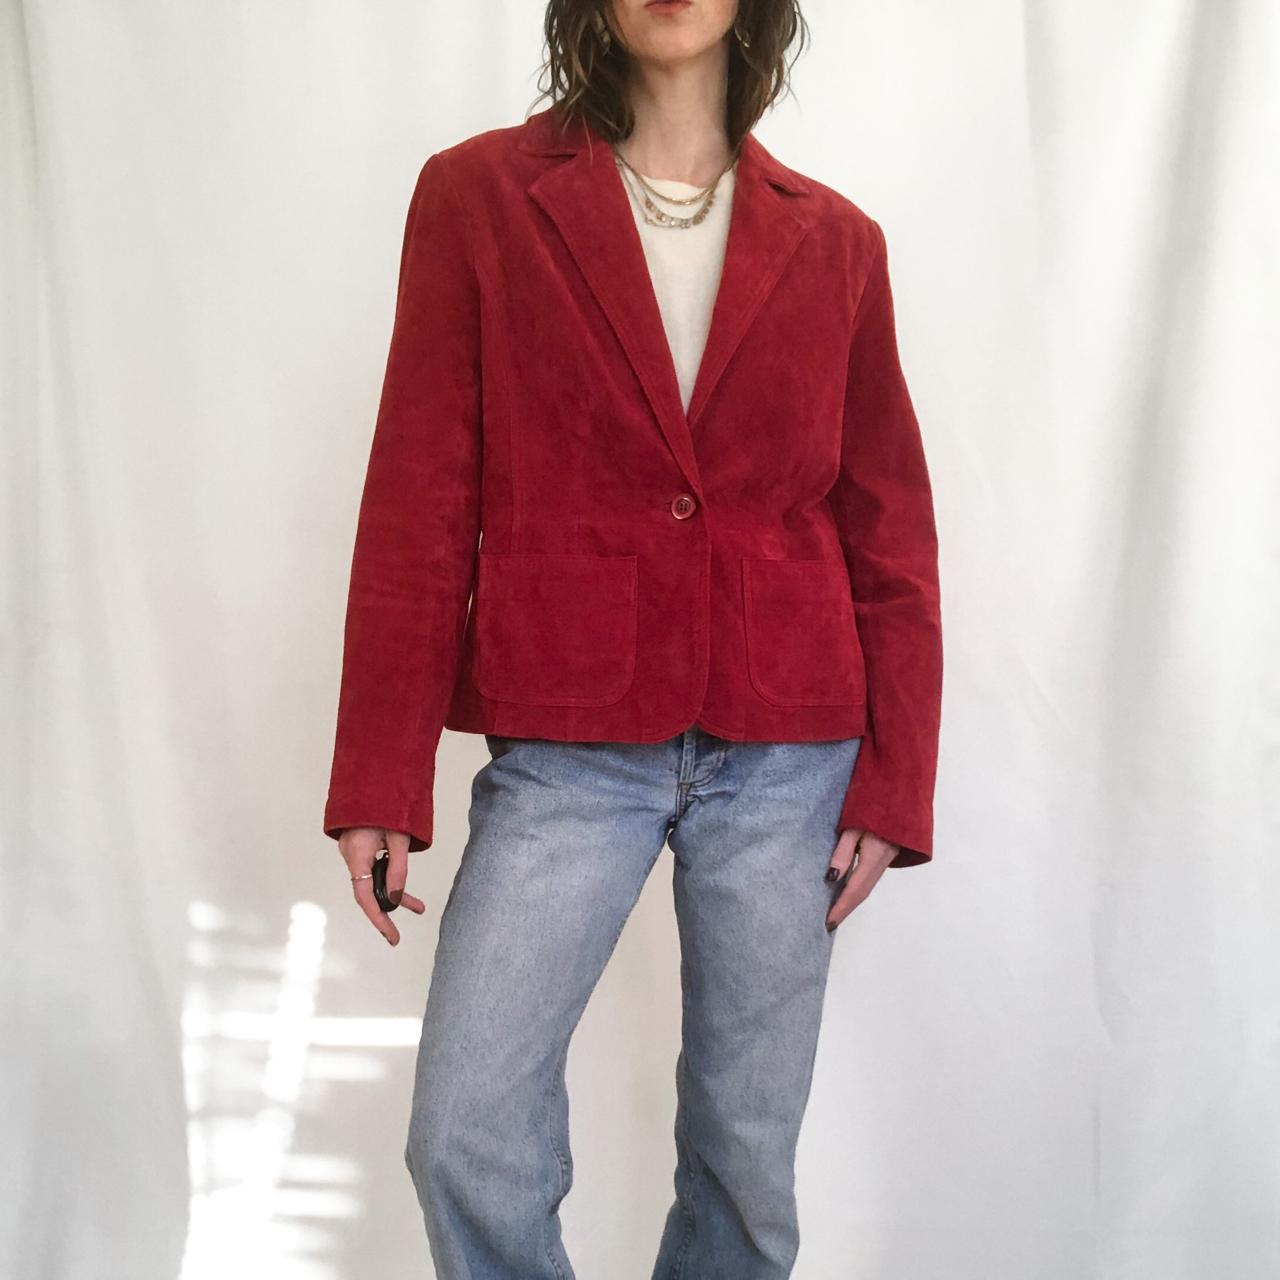 Vintage Cherry Red Suede Leather Jacket Classic &... - Depop